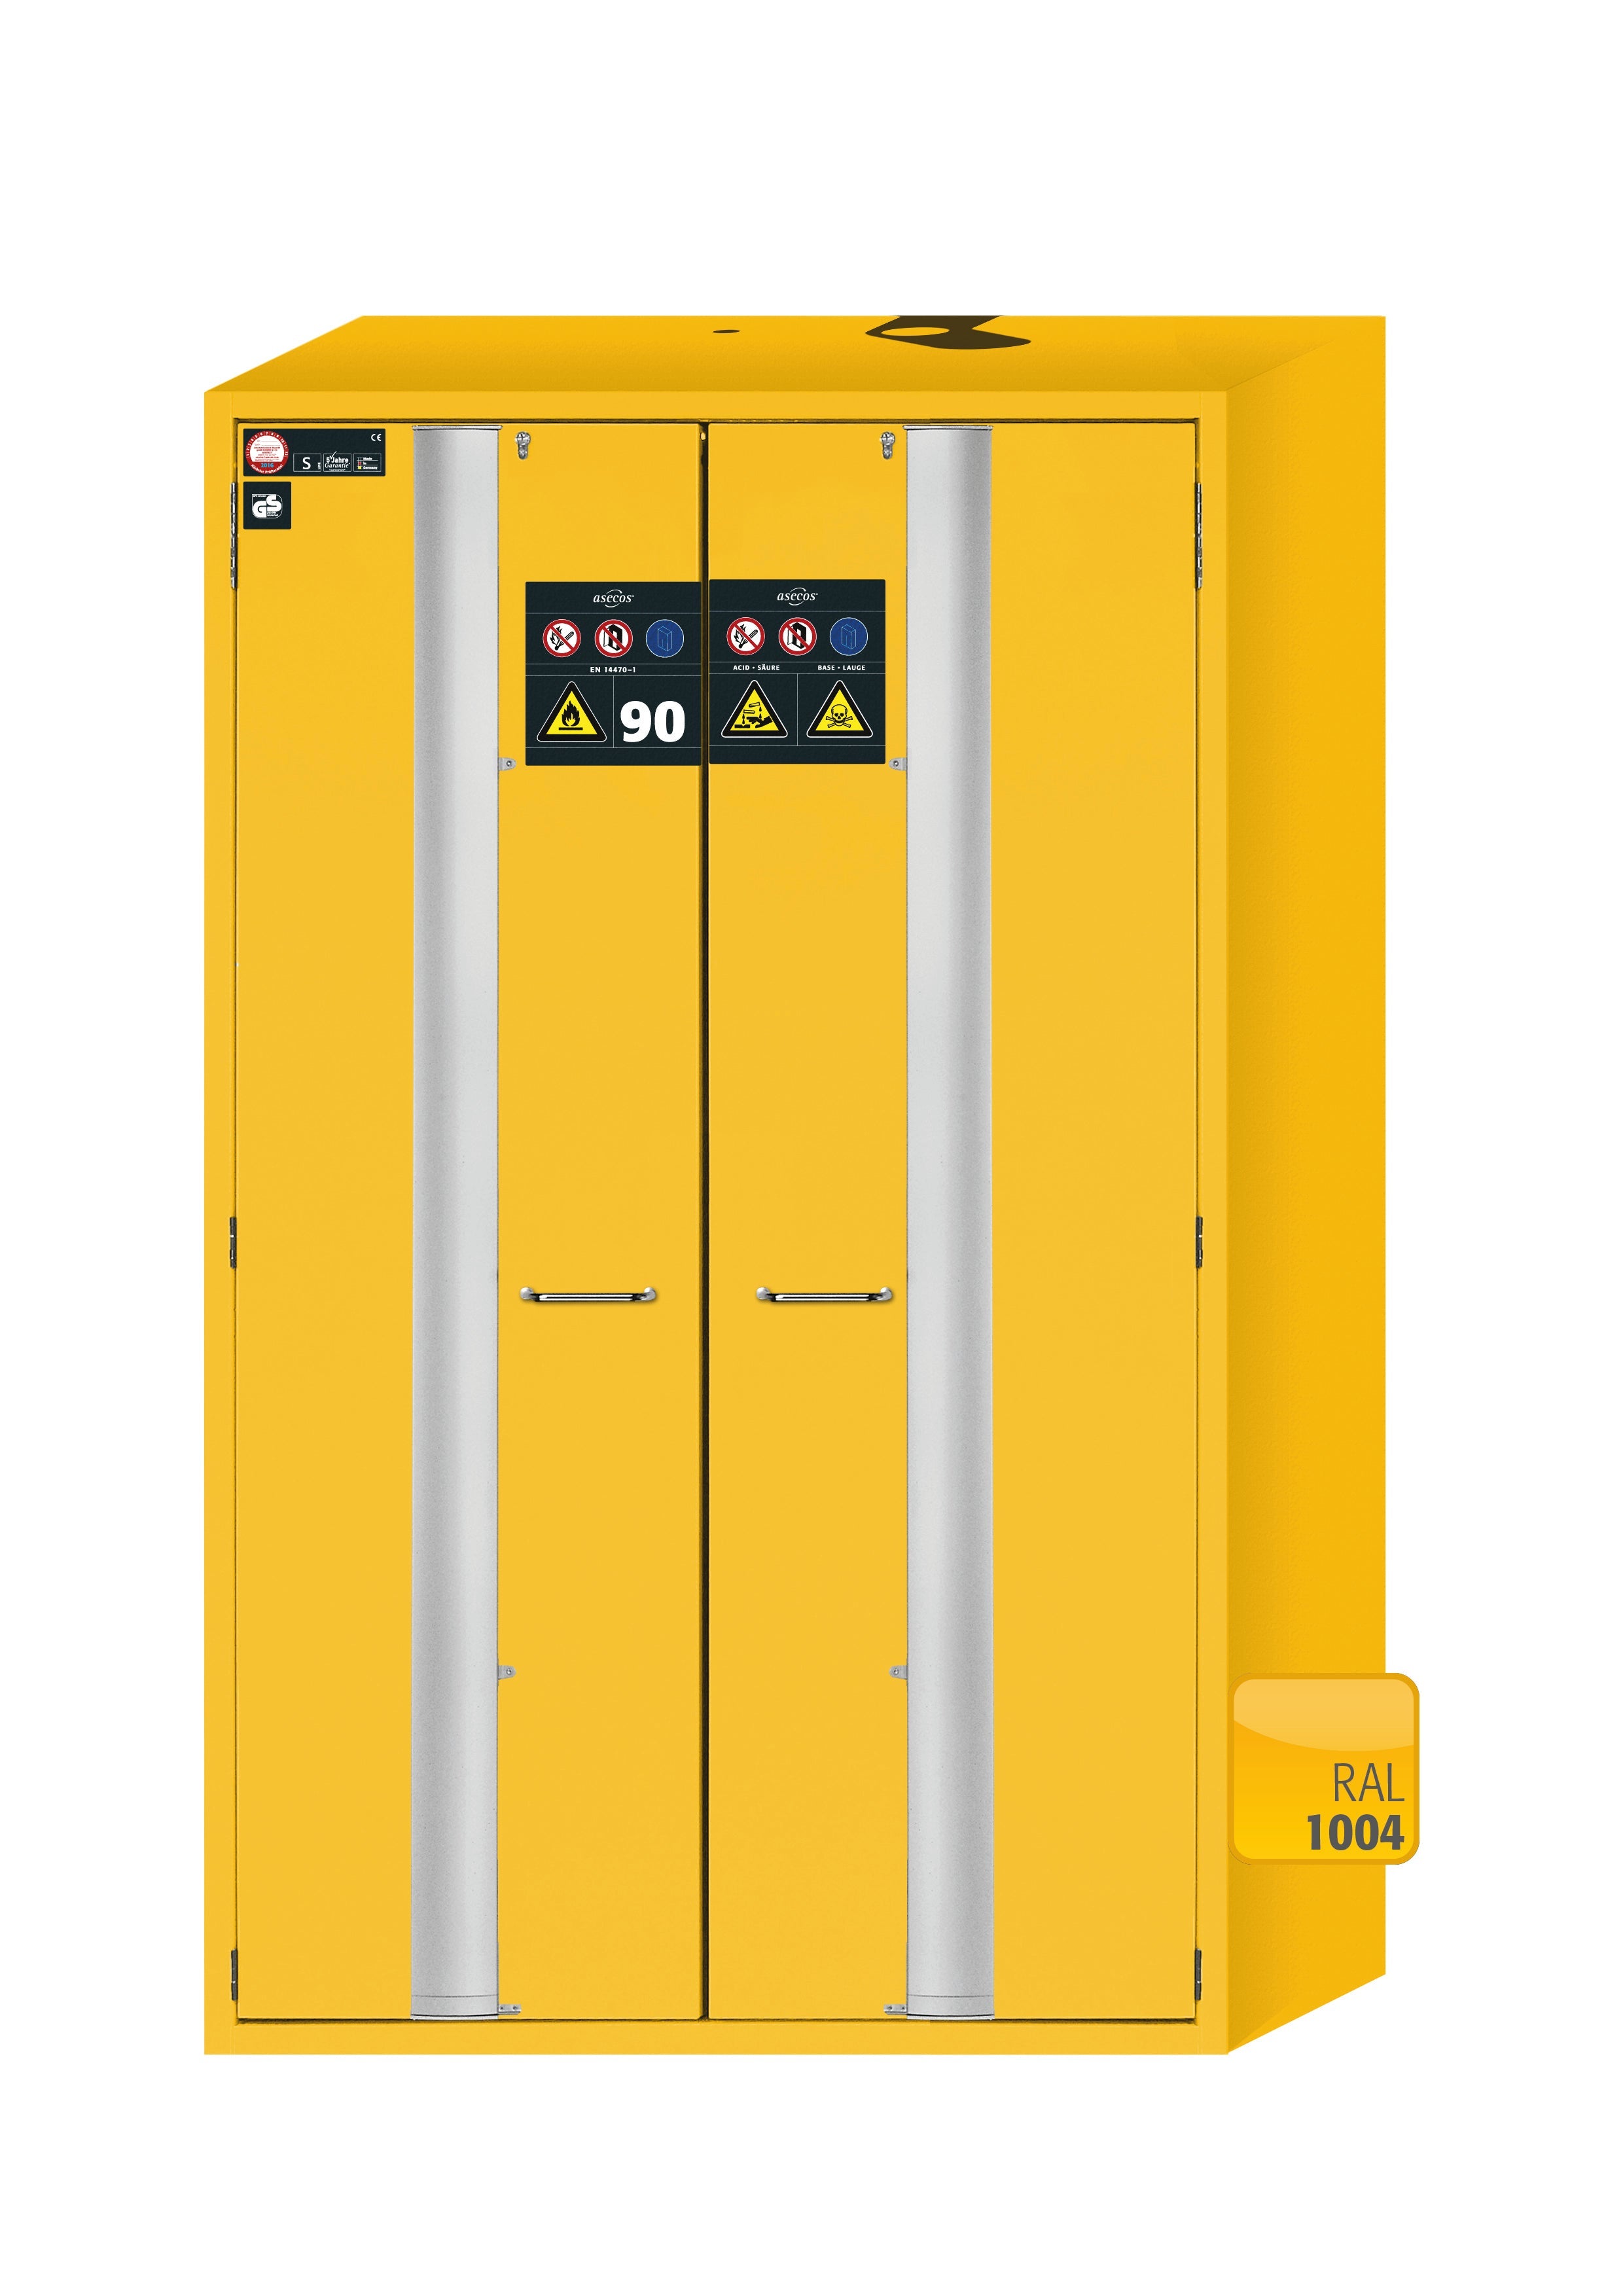 Type 90 safety cabinet S-PHOENIX-90 model S90.196.120.MV.FDAS in safety yellow RAL 1004 with 3x standard shelves (sheet steel)